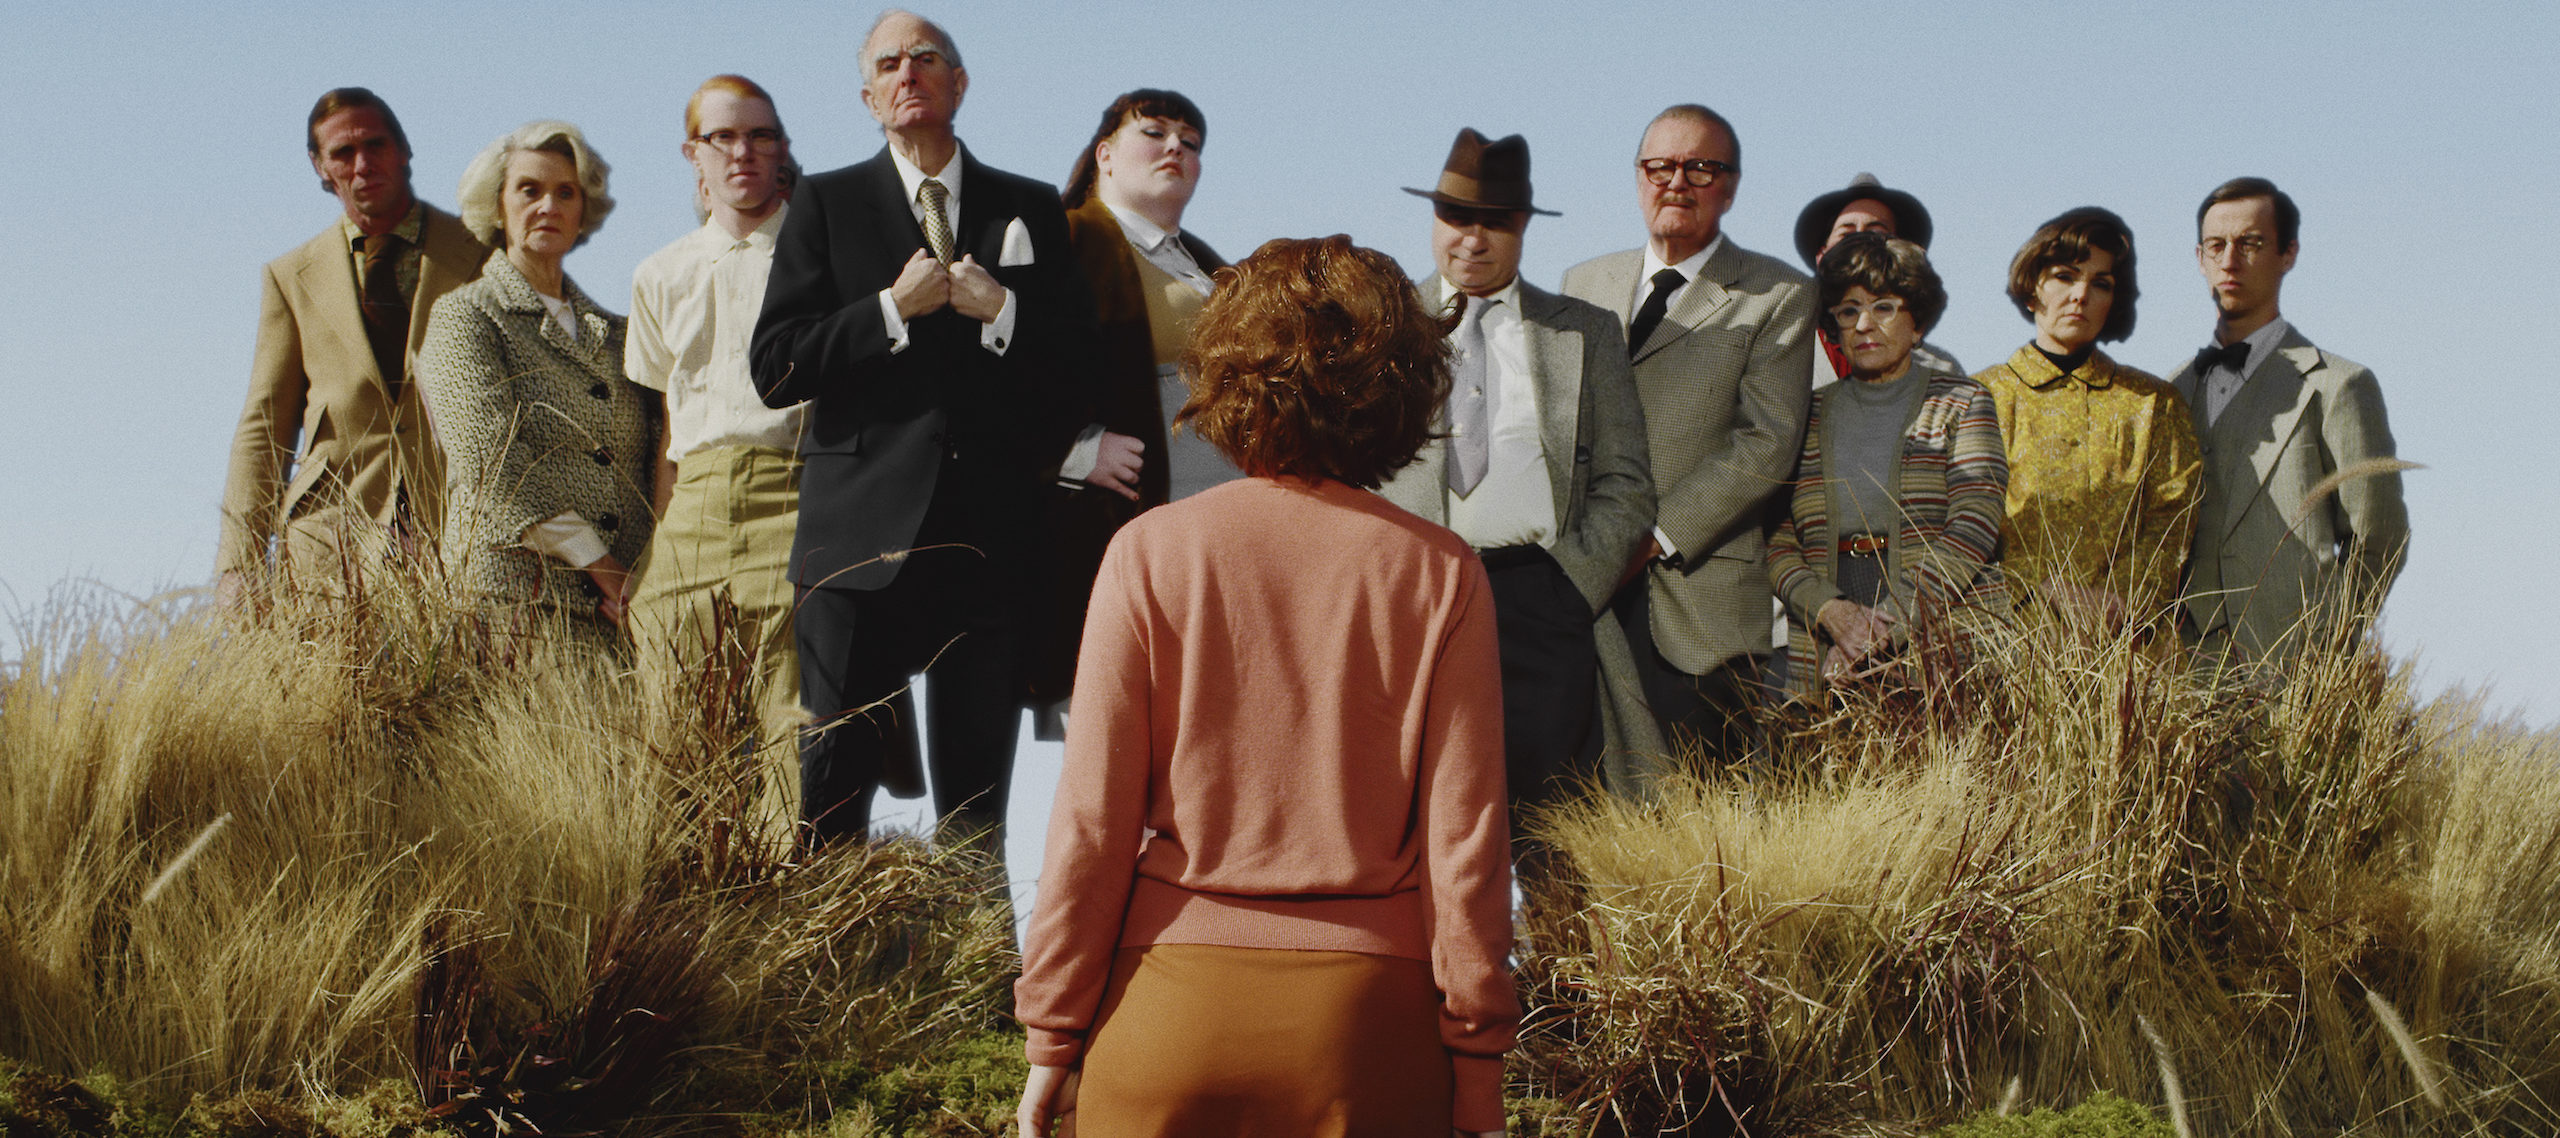 A color photograph of a woman with short red hair and pink cardigan, standing with her back to the camera in a field of tall yellow grass. She faces twelve men and women, who stand slightly elevated above her in a line and look pointedly at her.